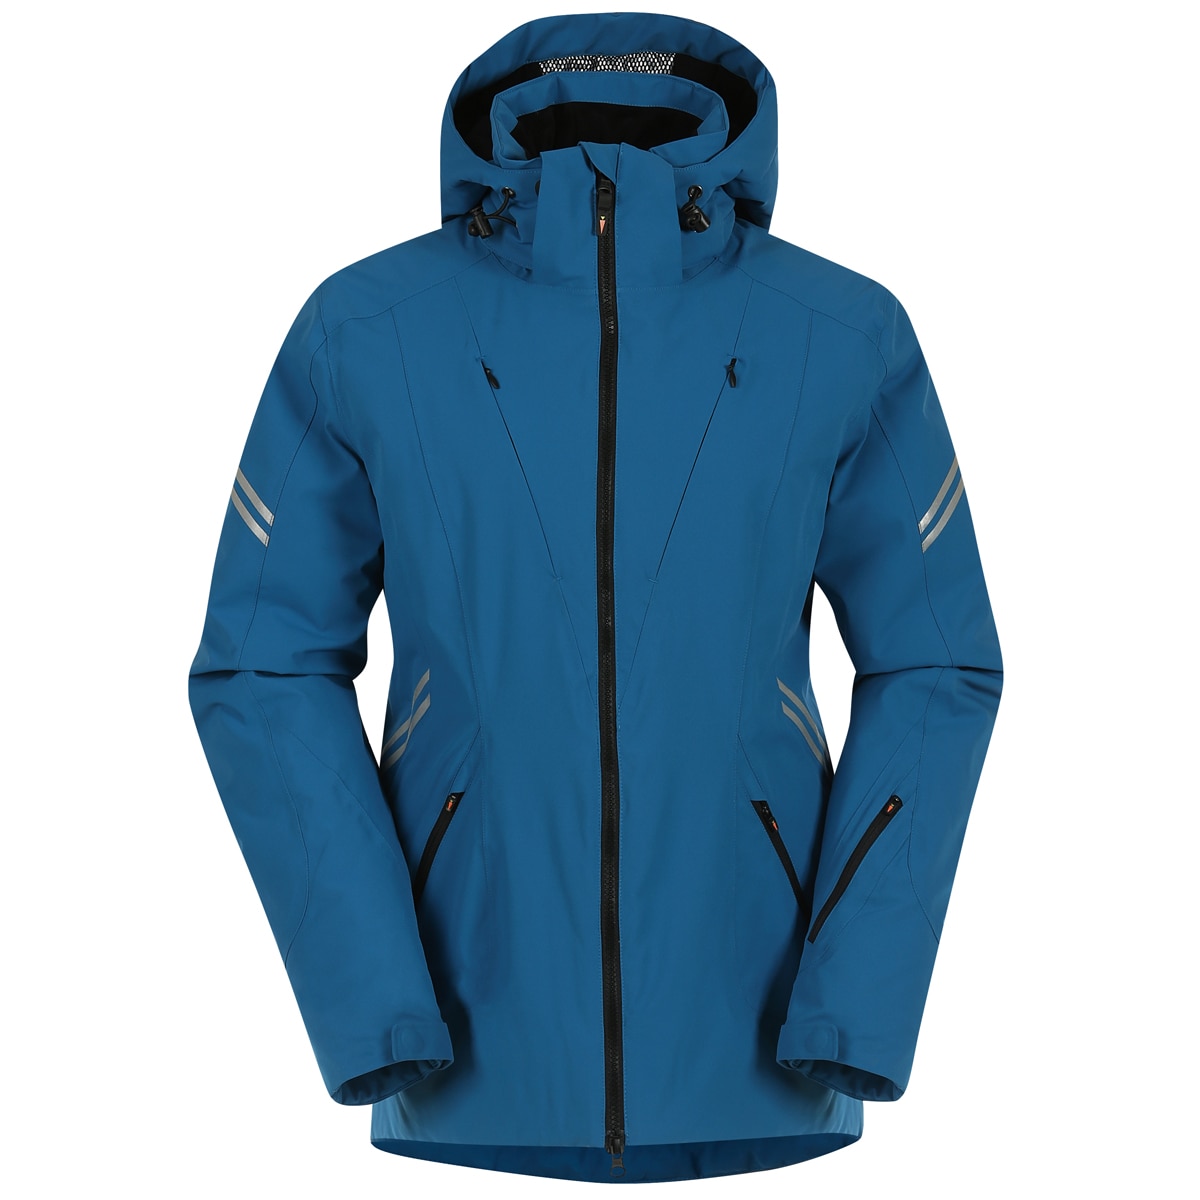 Kerrits Tempest Insulated Waterproof Parka